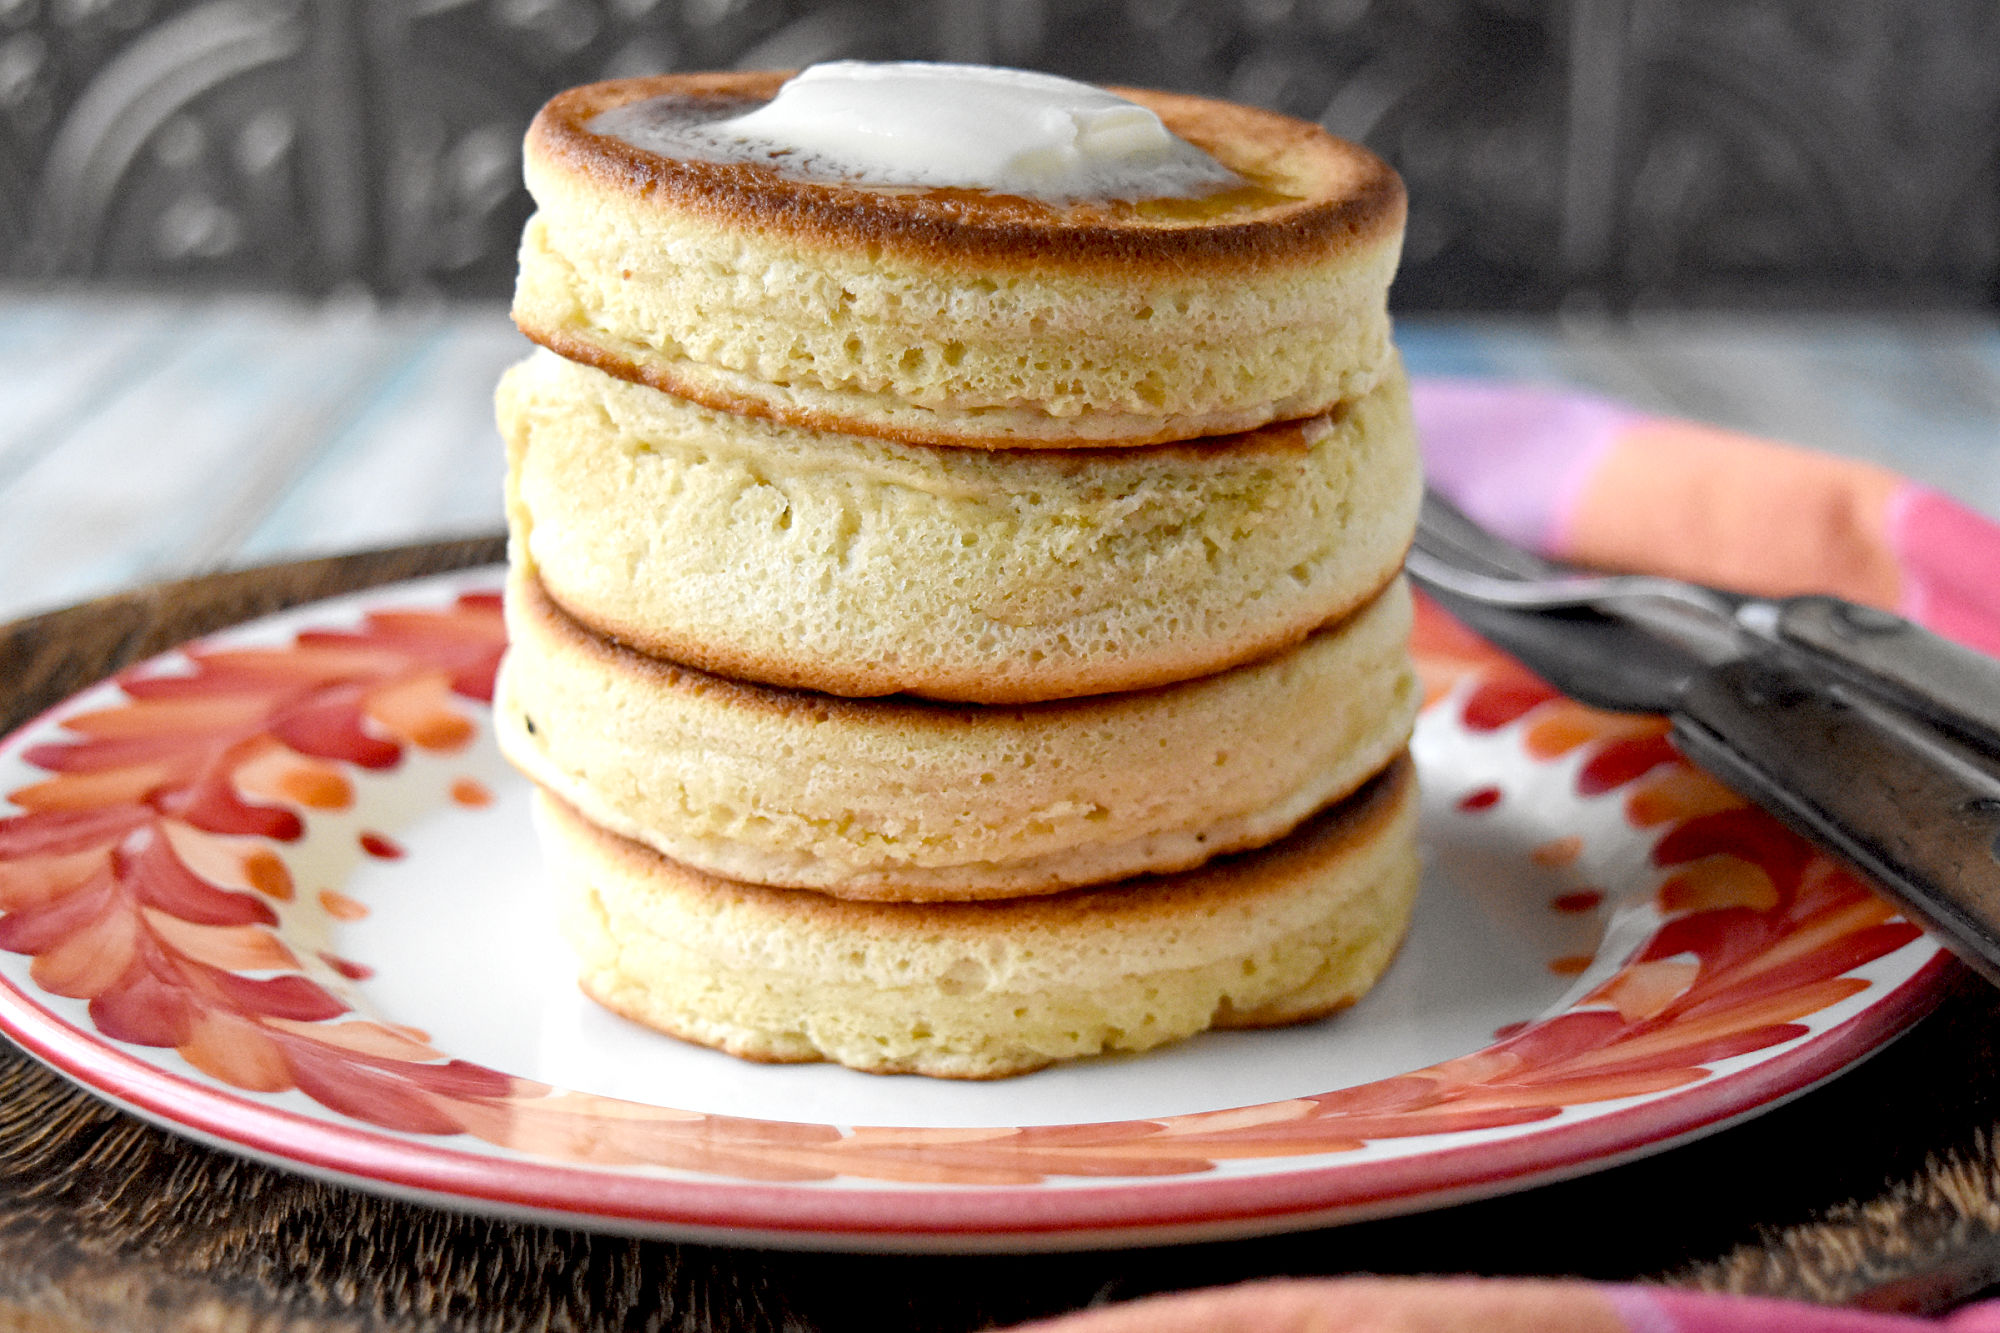 Souffle Pancakes are not difficult to make but make a huge impact on your brunch guests. The hardest part is waiting for these pancakes to cook. #BrunchWeek #pancake #soufflepancake #pancakerecipe #brunchtime
